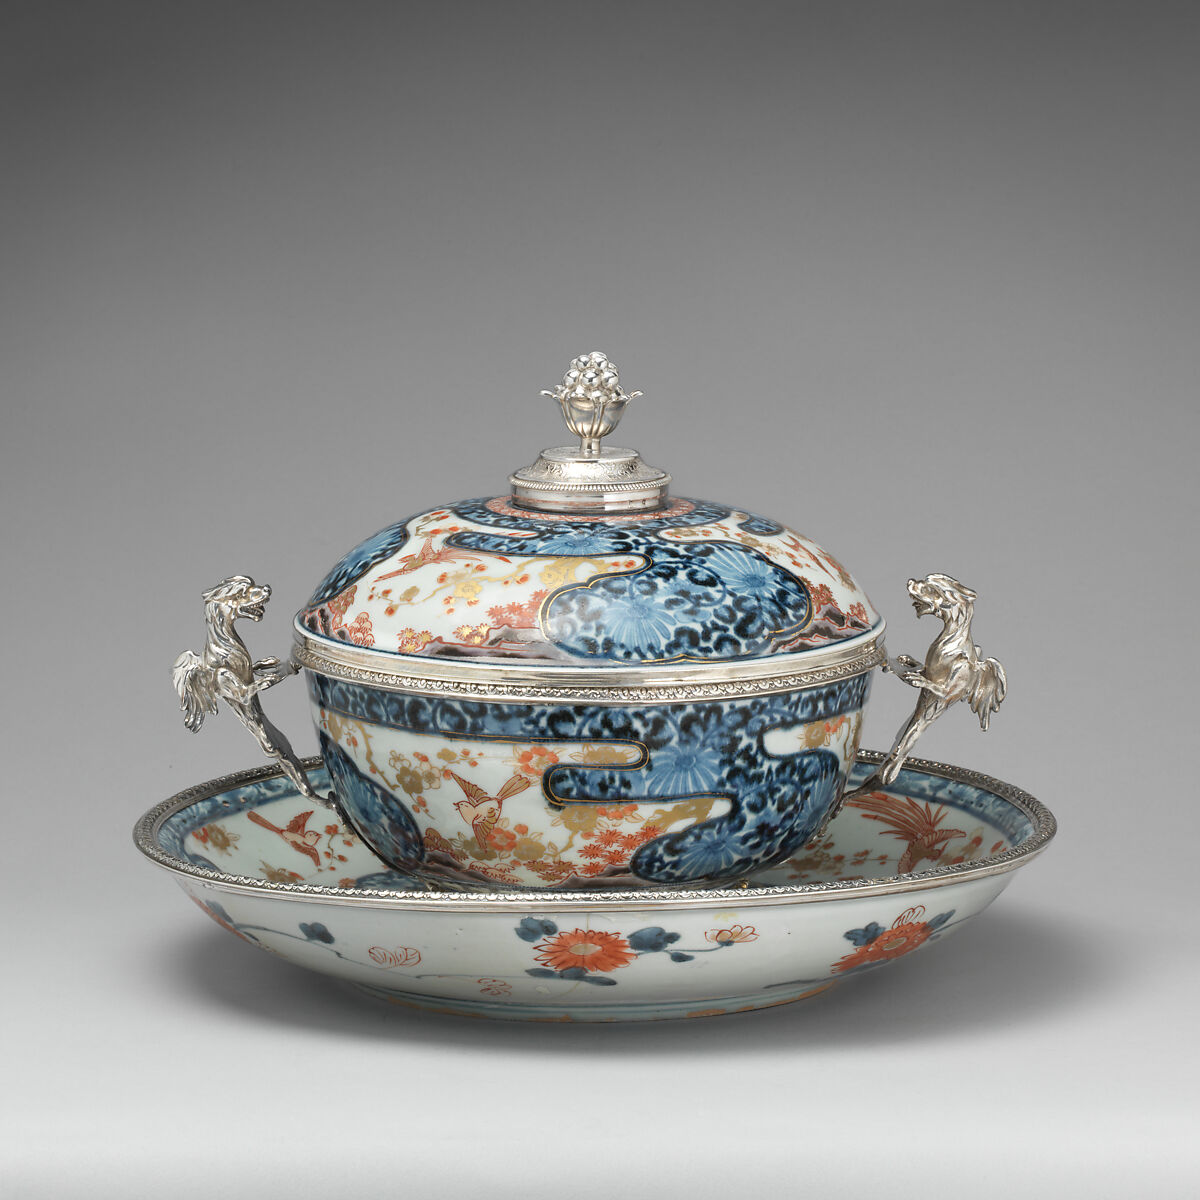 Bowl with cover and stand, Paul Le Riche (French, master 1686, active 1738), Hard-paste porcelain, silver mounts, Japanese with French mounts 